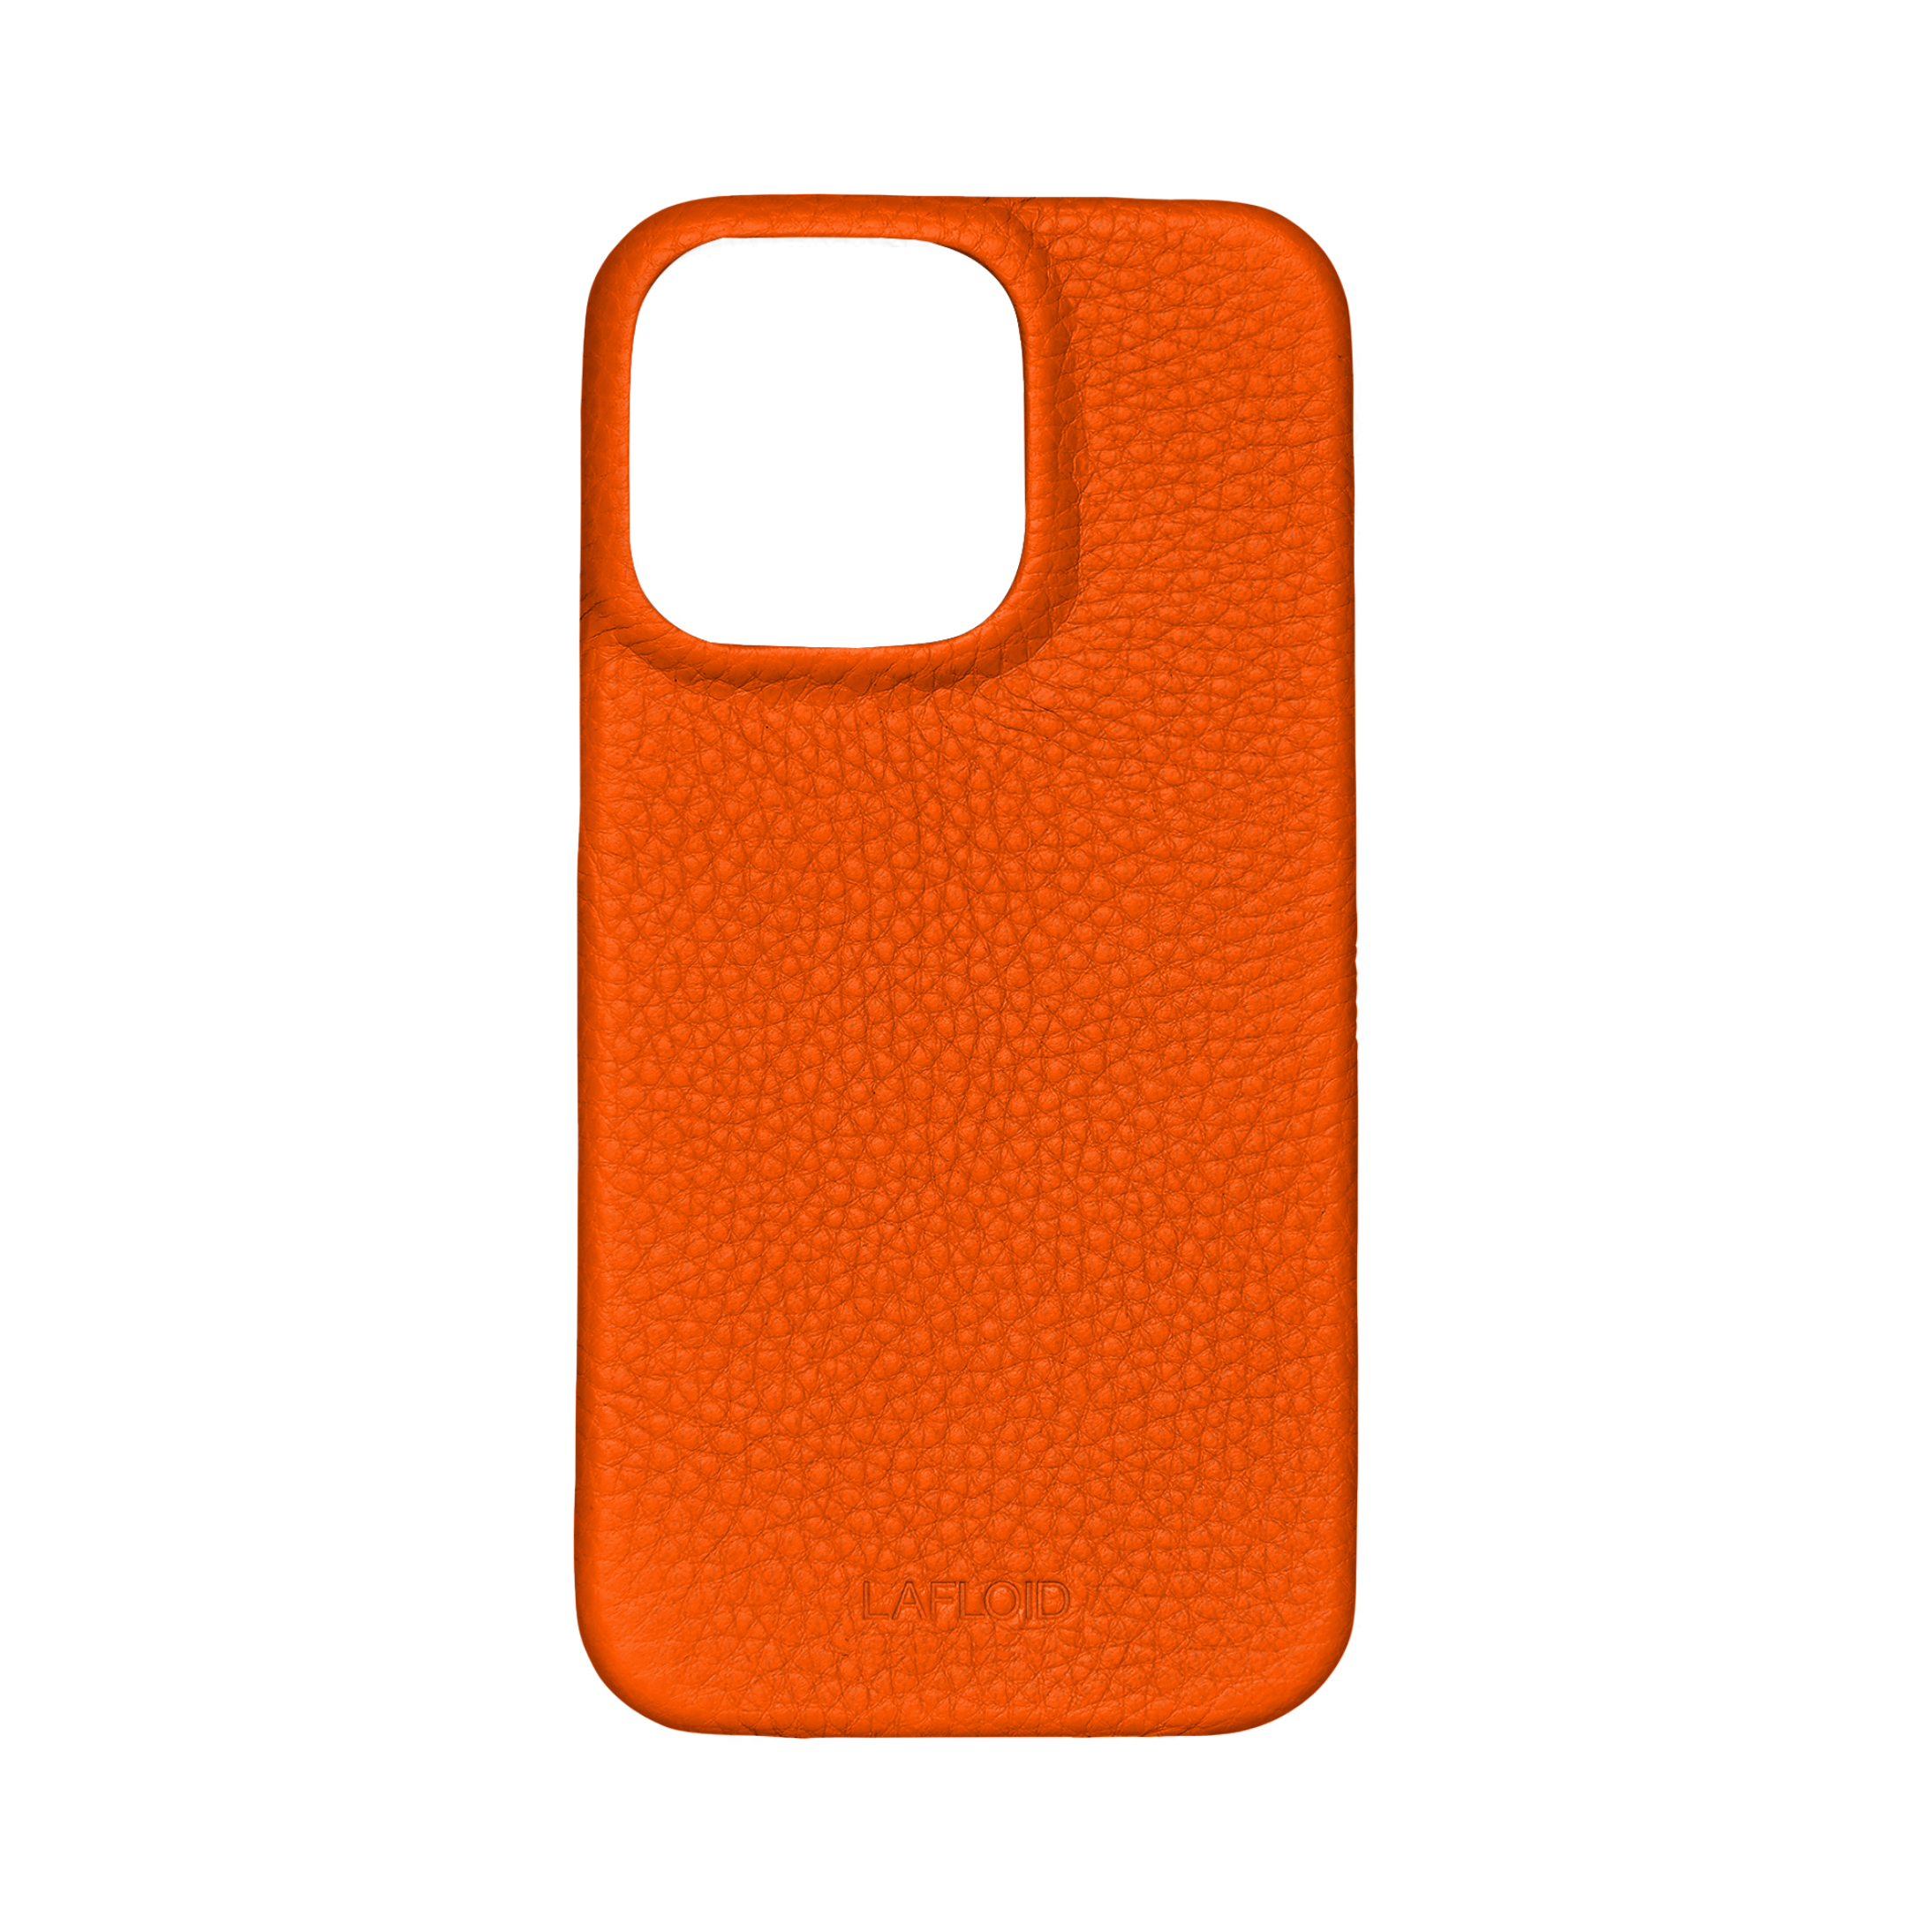 iPhone 14 Pro Max case - for testing